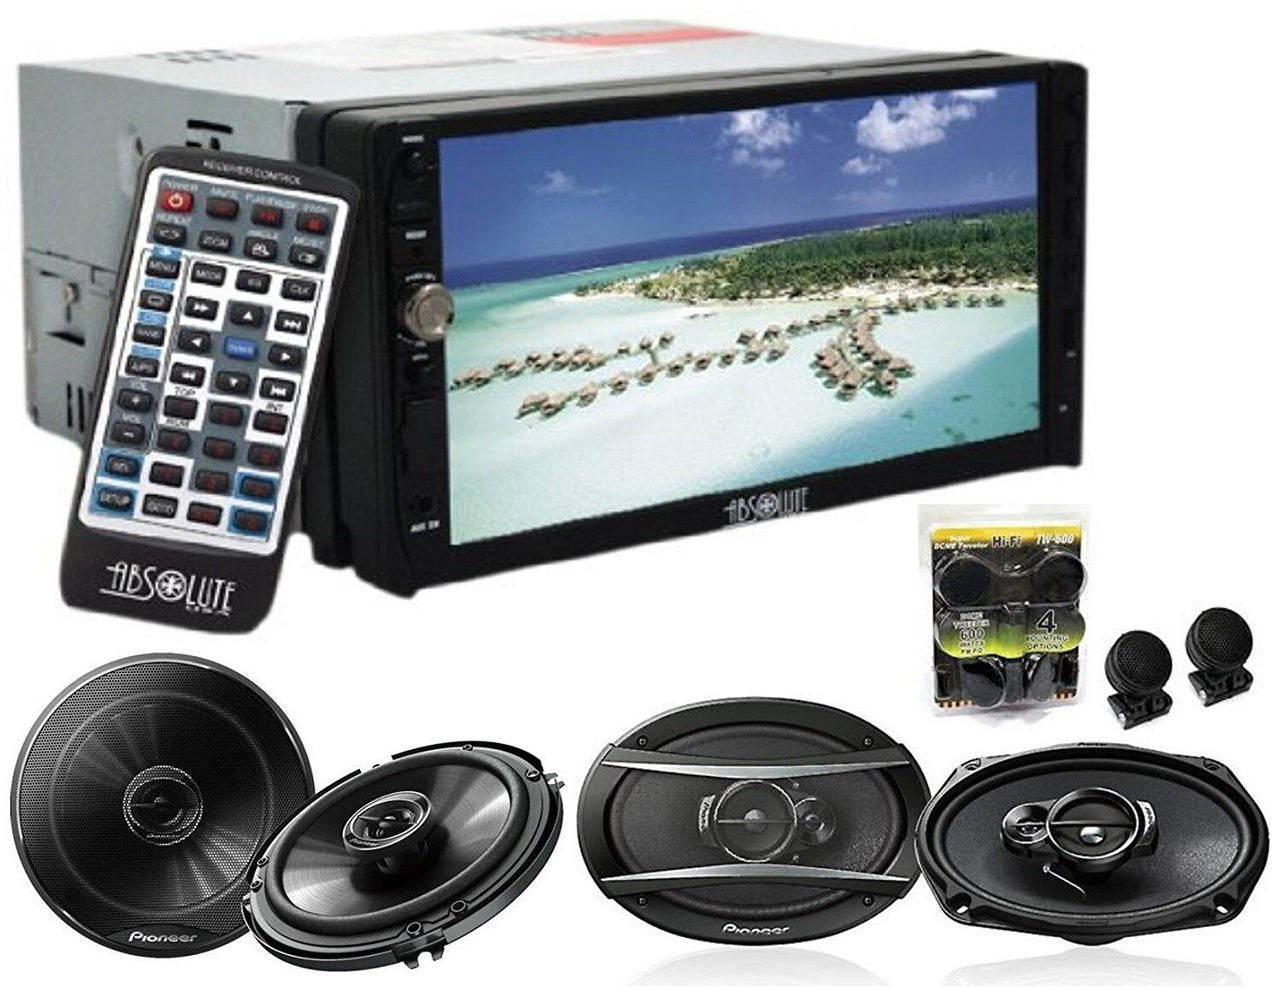 Absolute DD-3000 Double Din pioneer TS-G1620F, TS-G6930F TW600 7" DVD CD MP3 player Double Din head unit car stereo with pioneer TS-G1620F, TS-G6930F speakers & TW600 tweeter